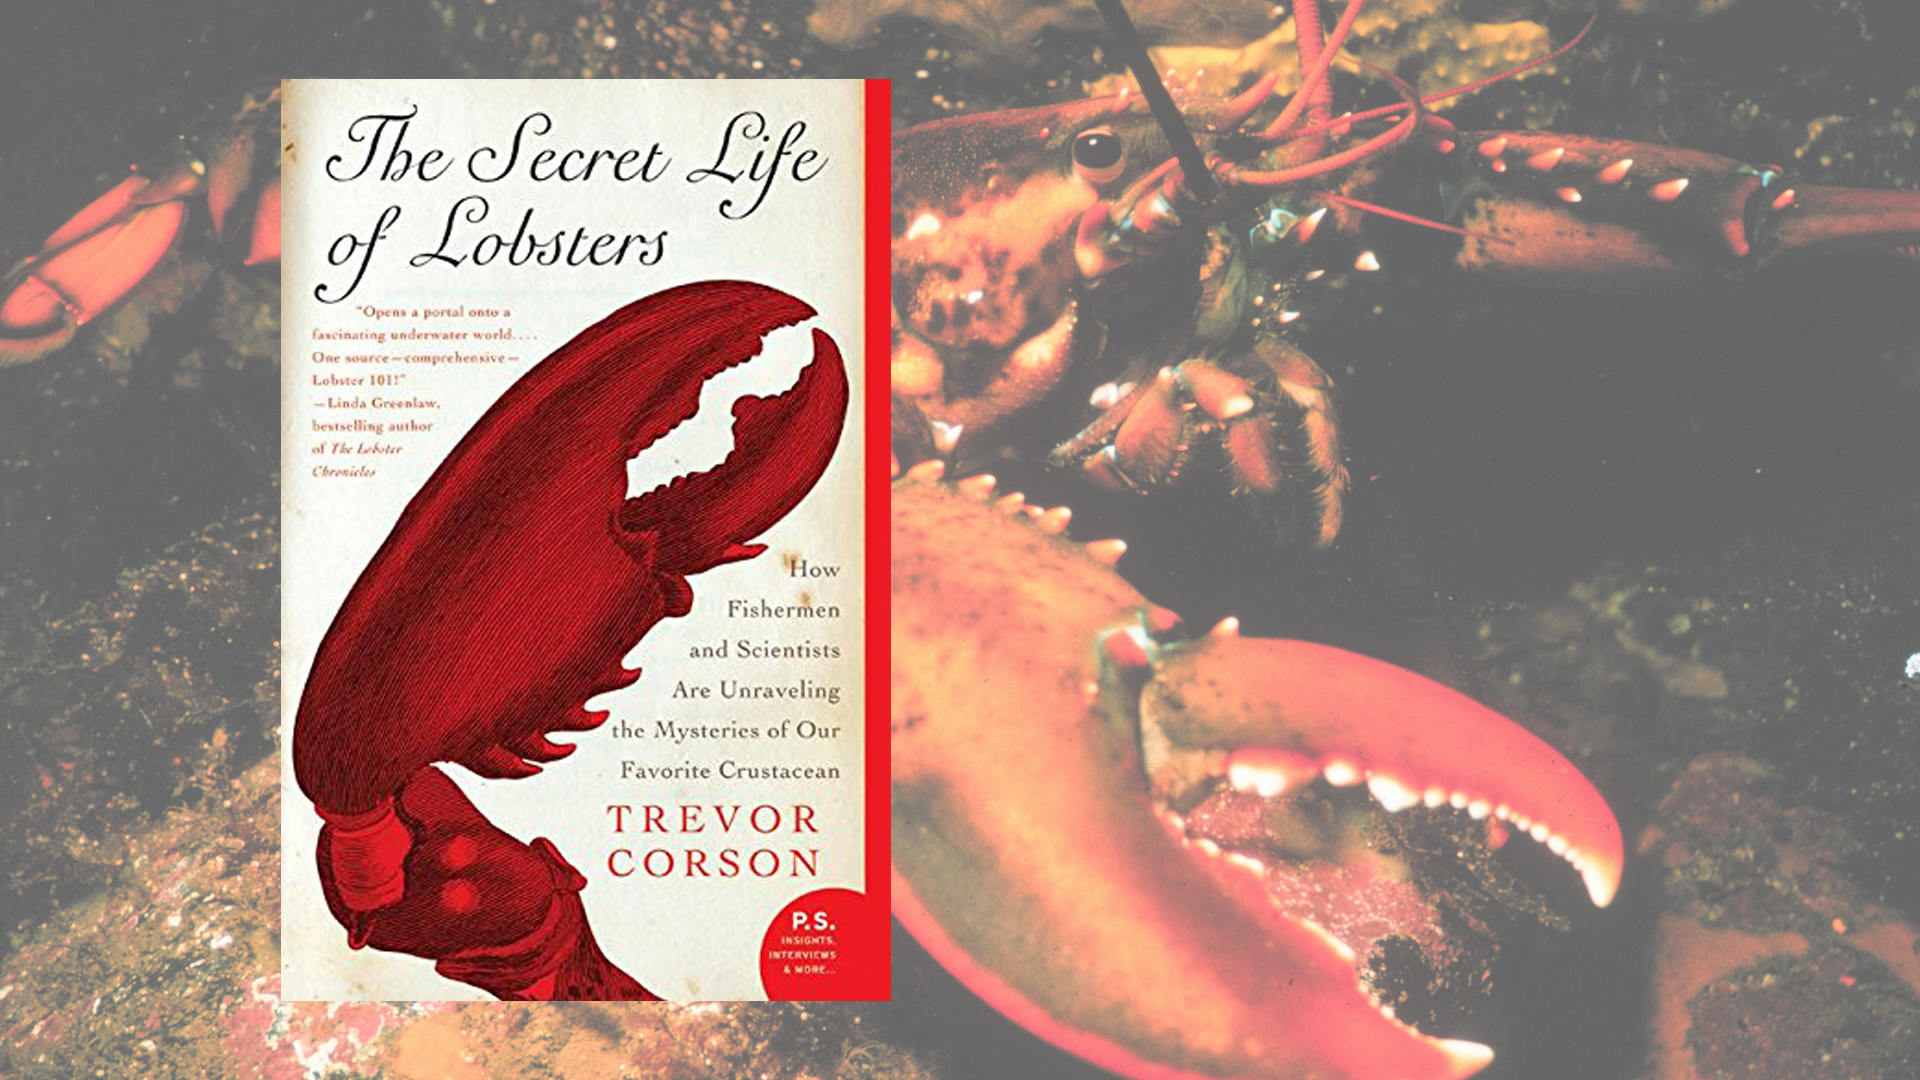 The Secret Life of Lobsters book cover with lobster photo in background